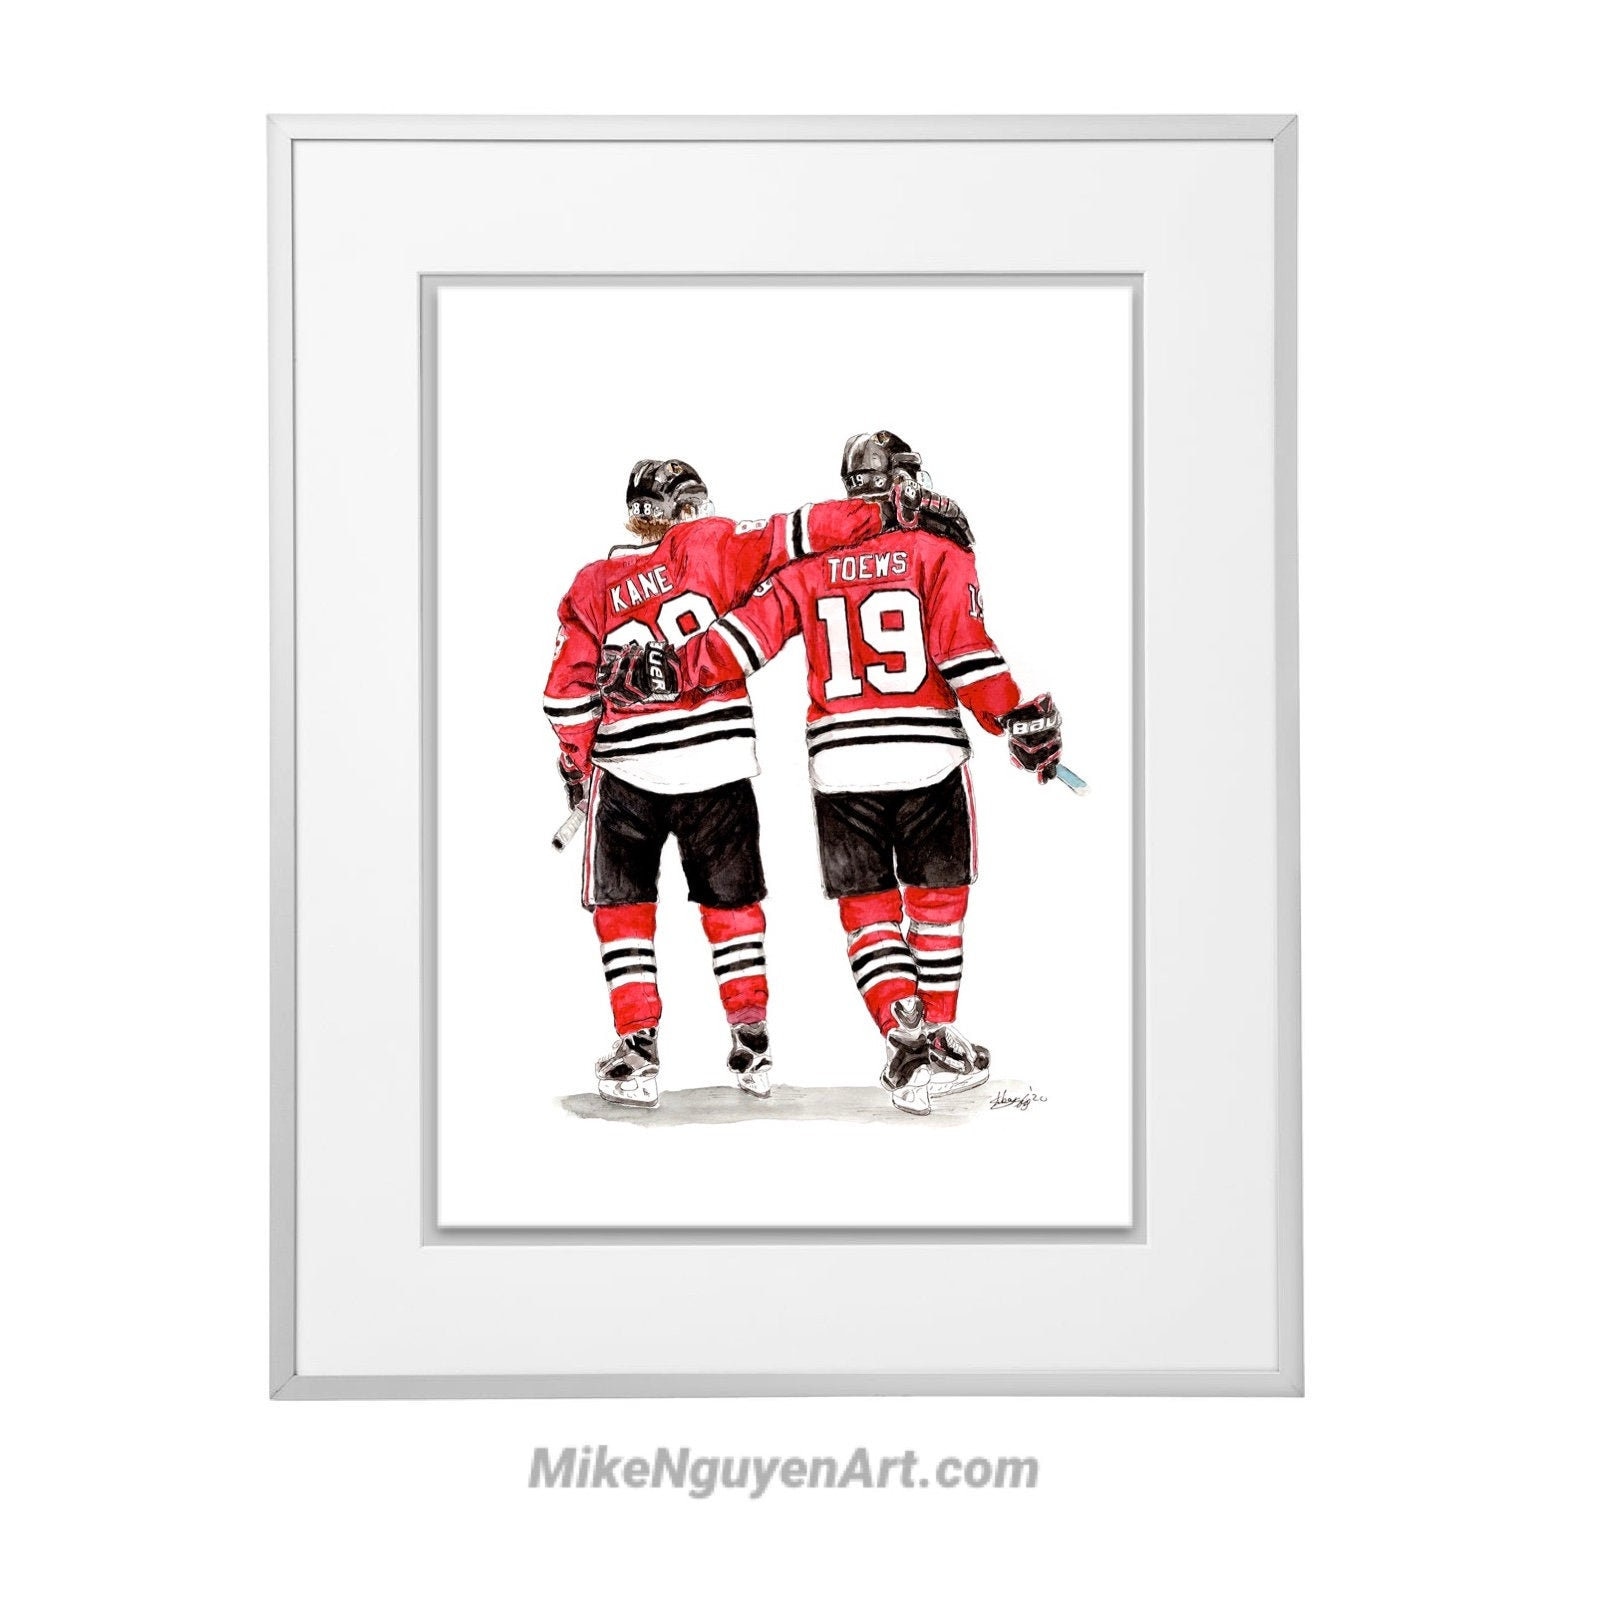 The Art of Hockey: Chicago Blackhawks: In Need of a Third Jersey!